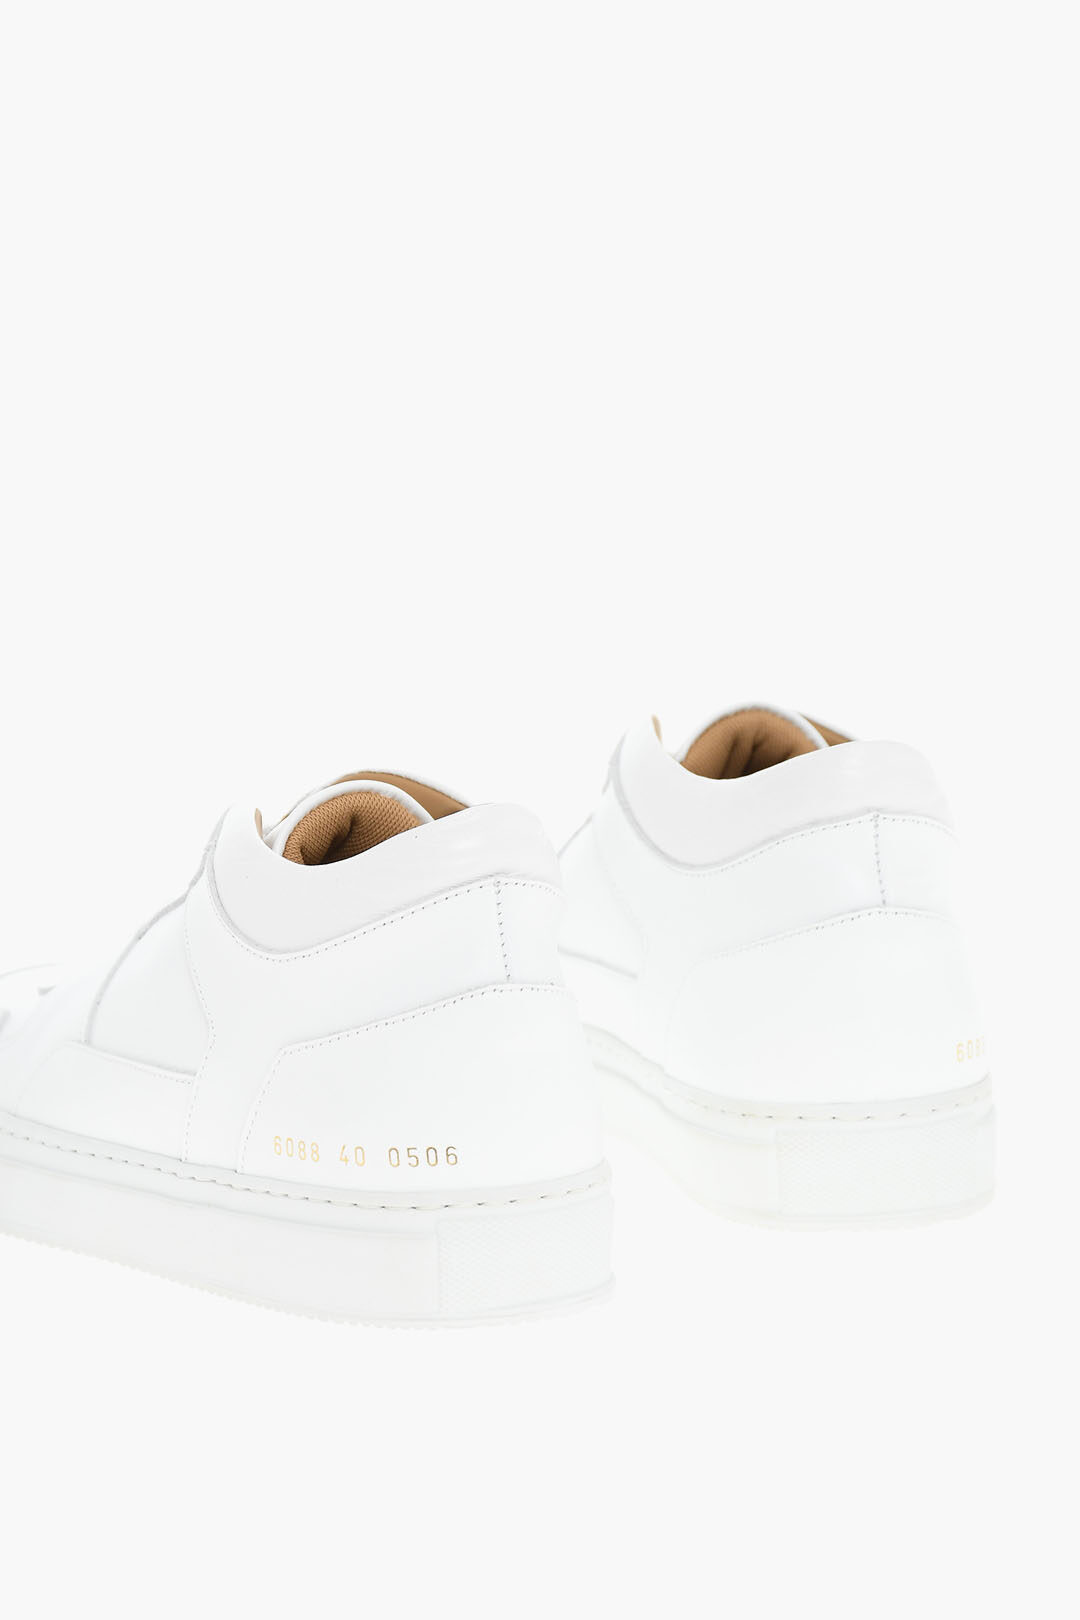 Common projects Leather DECADES MID Low-Top Sneakers women - Glamood Outlet